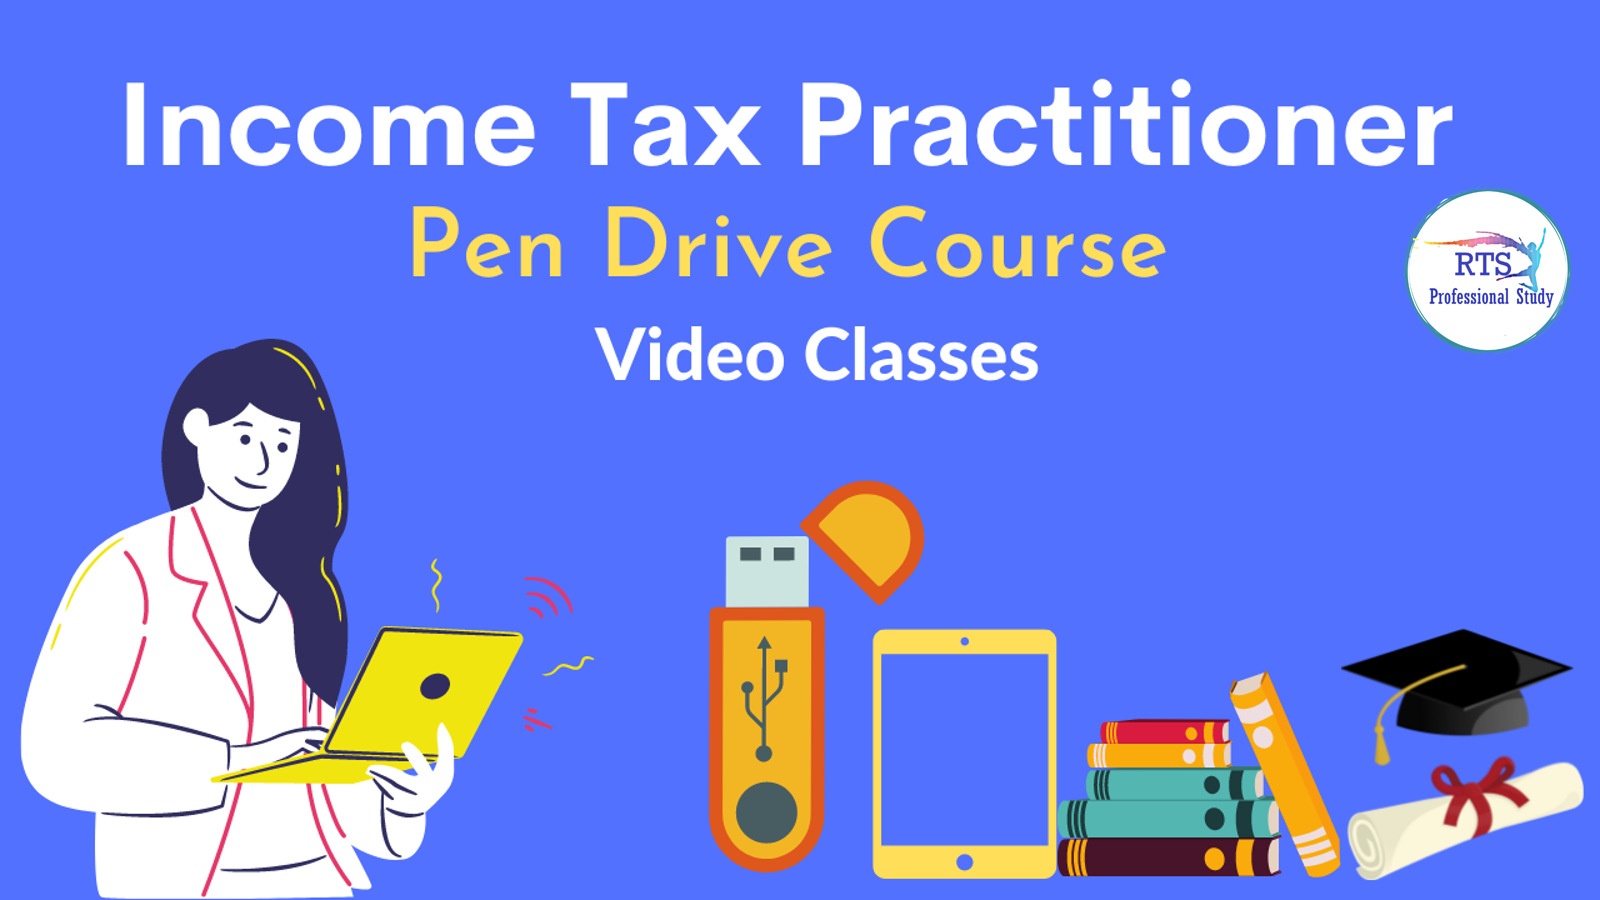 Key Features to Look for in an Online Income Tax Course